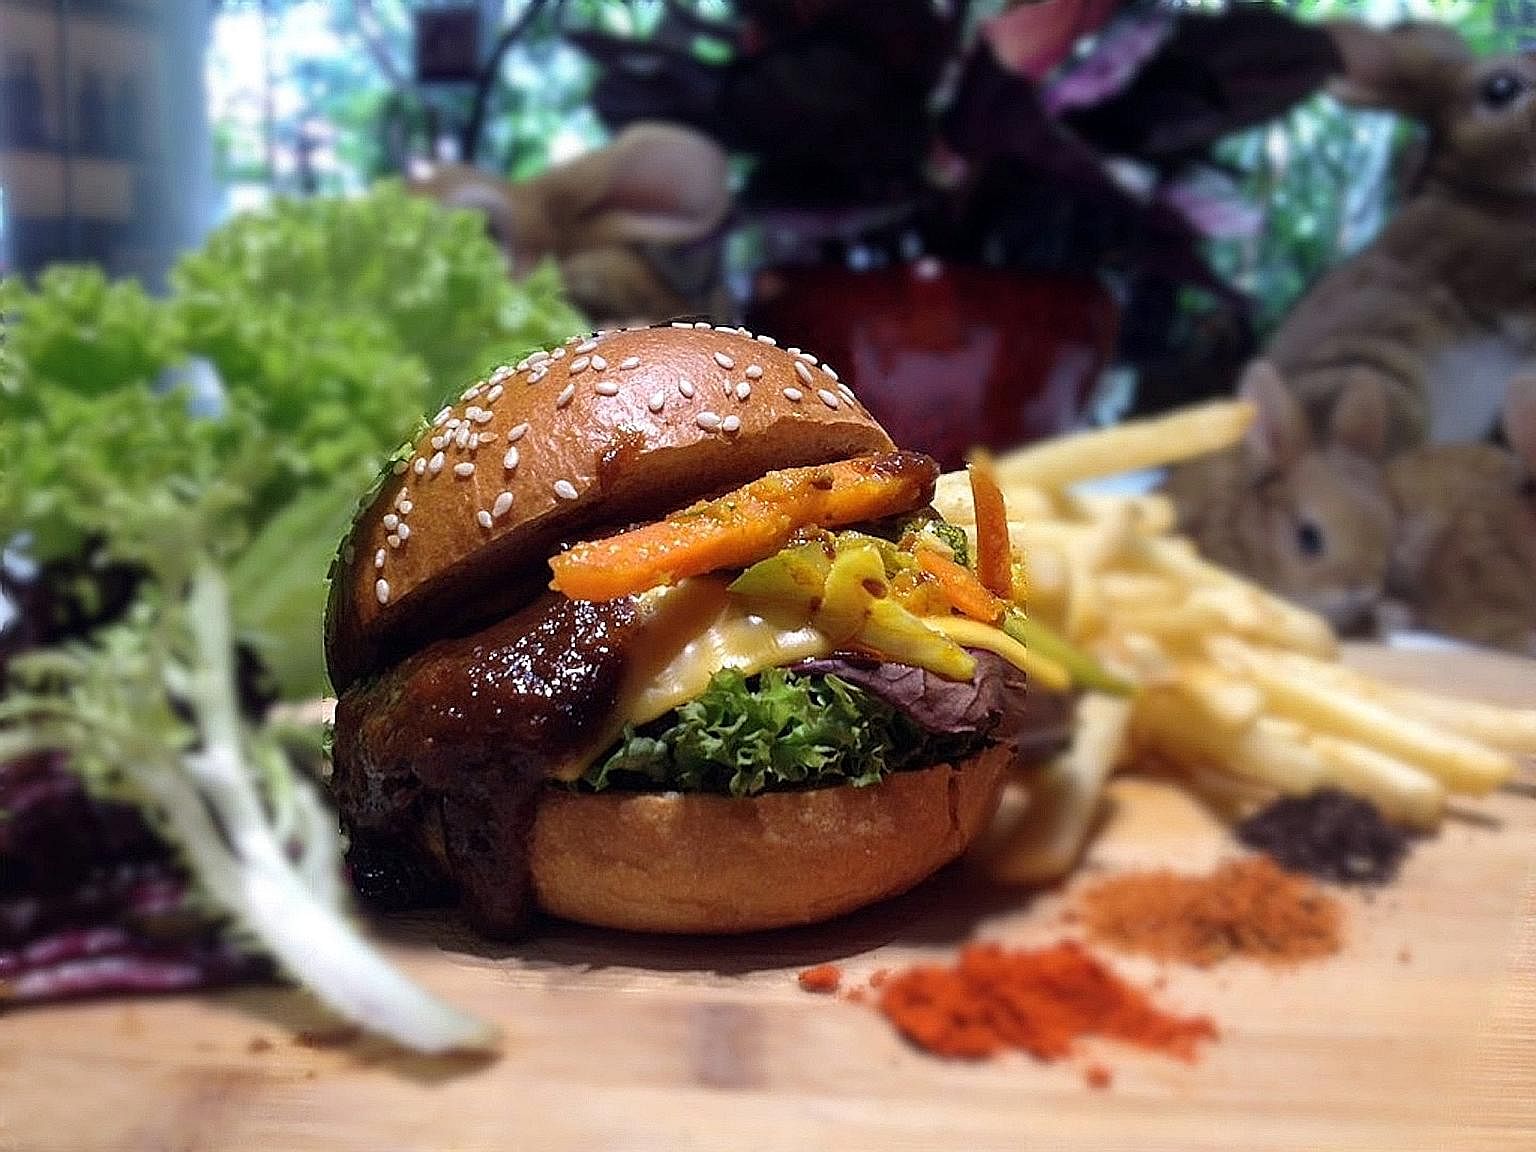 Beef cheek rendang burger with achar and Cajun fries (left) from Hareloom Cafe & Bar, run by chef Matthew Mok (above).